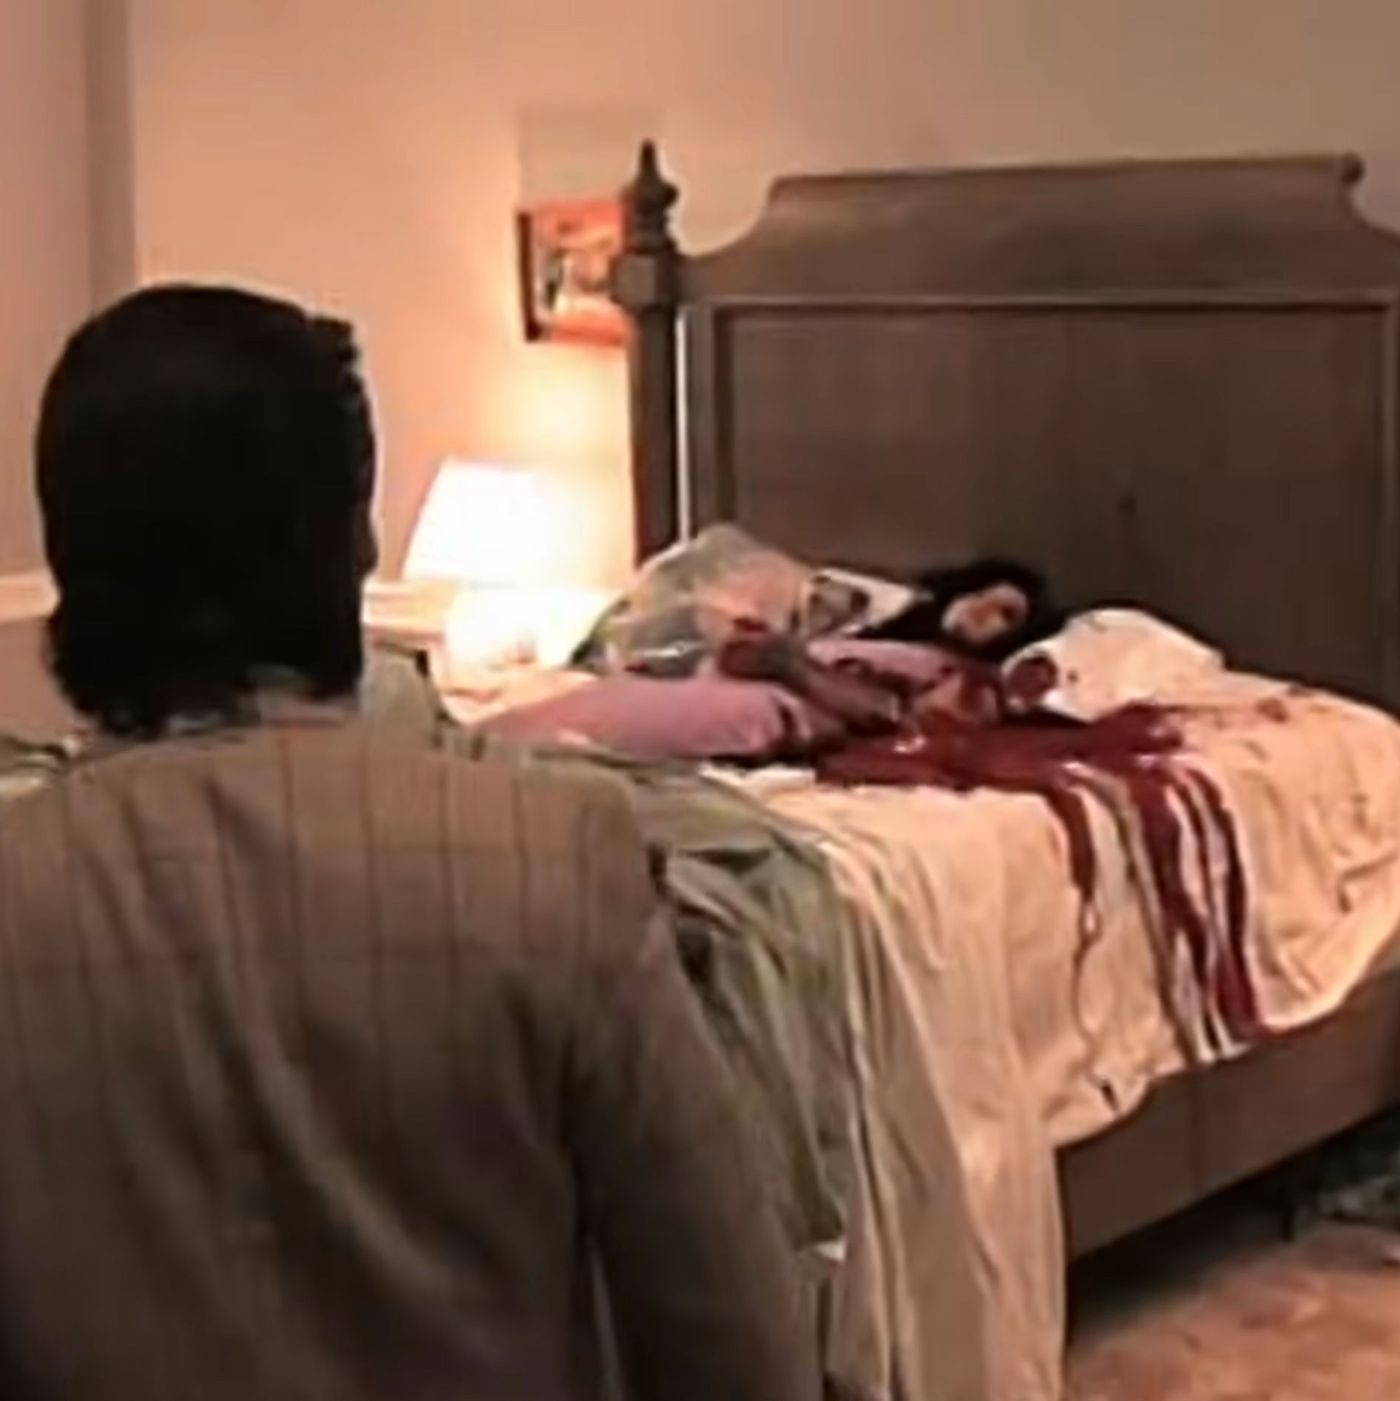 Xxx Mom And Son Sex Sleeping Bedroom - The Best V/H/S Segments, Ranked